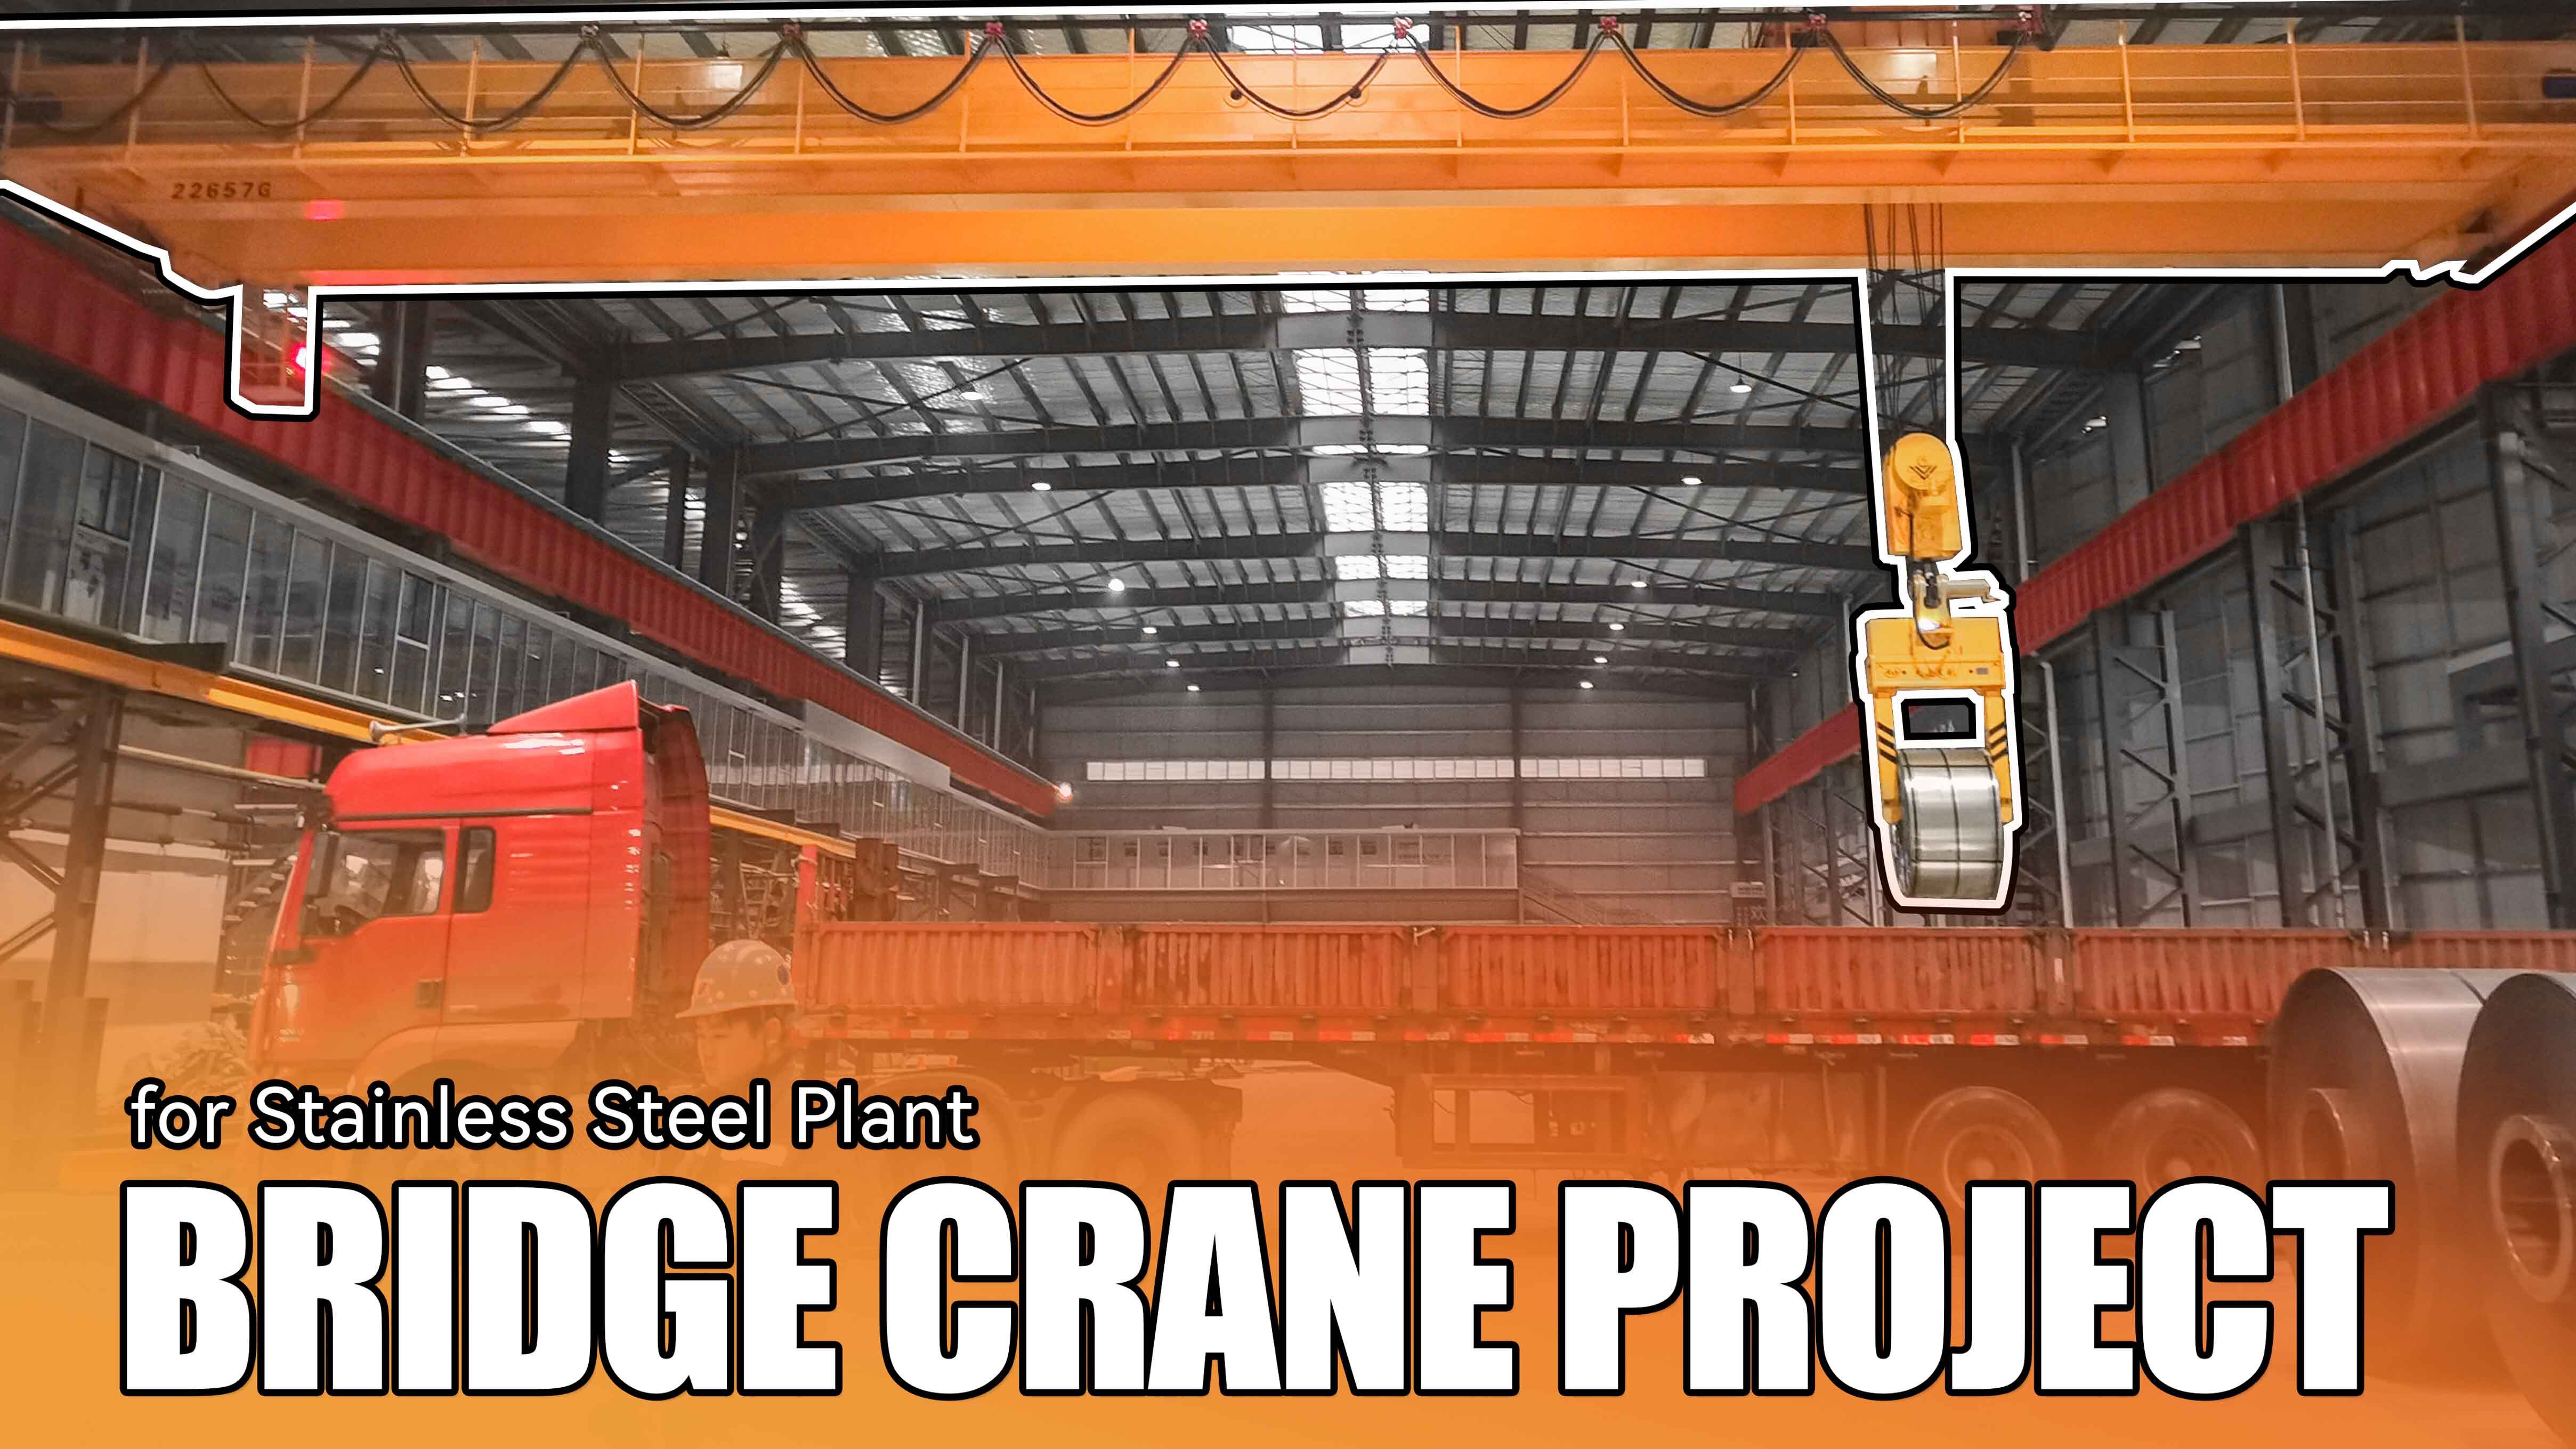 Guanhui Bridge Crane Project for Stainless Steel Plant